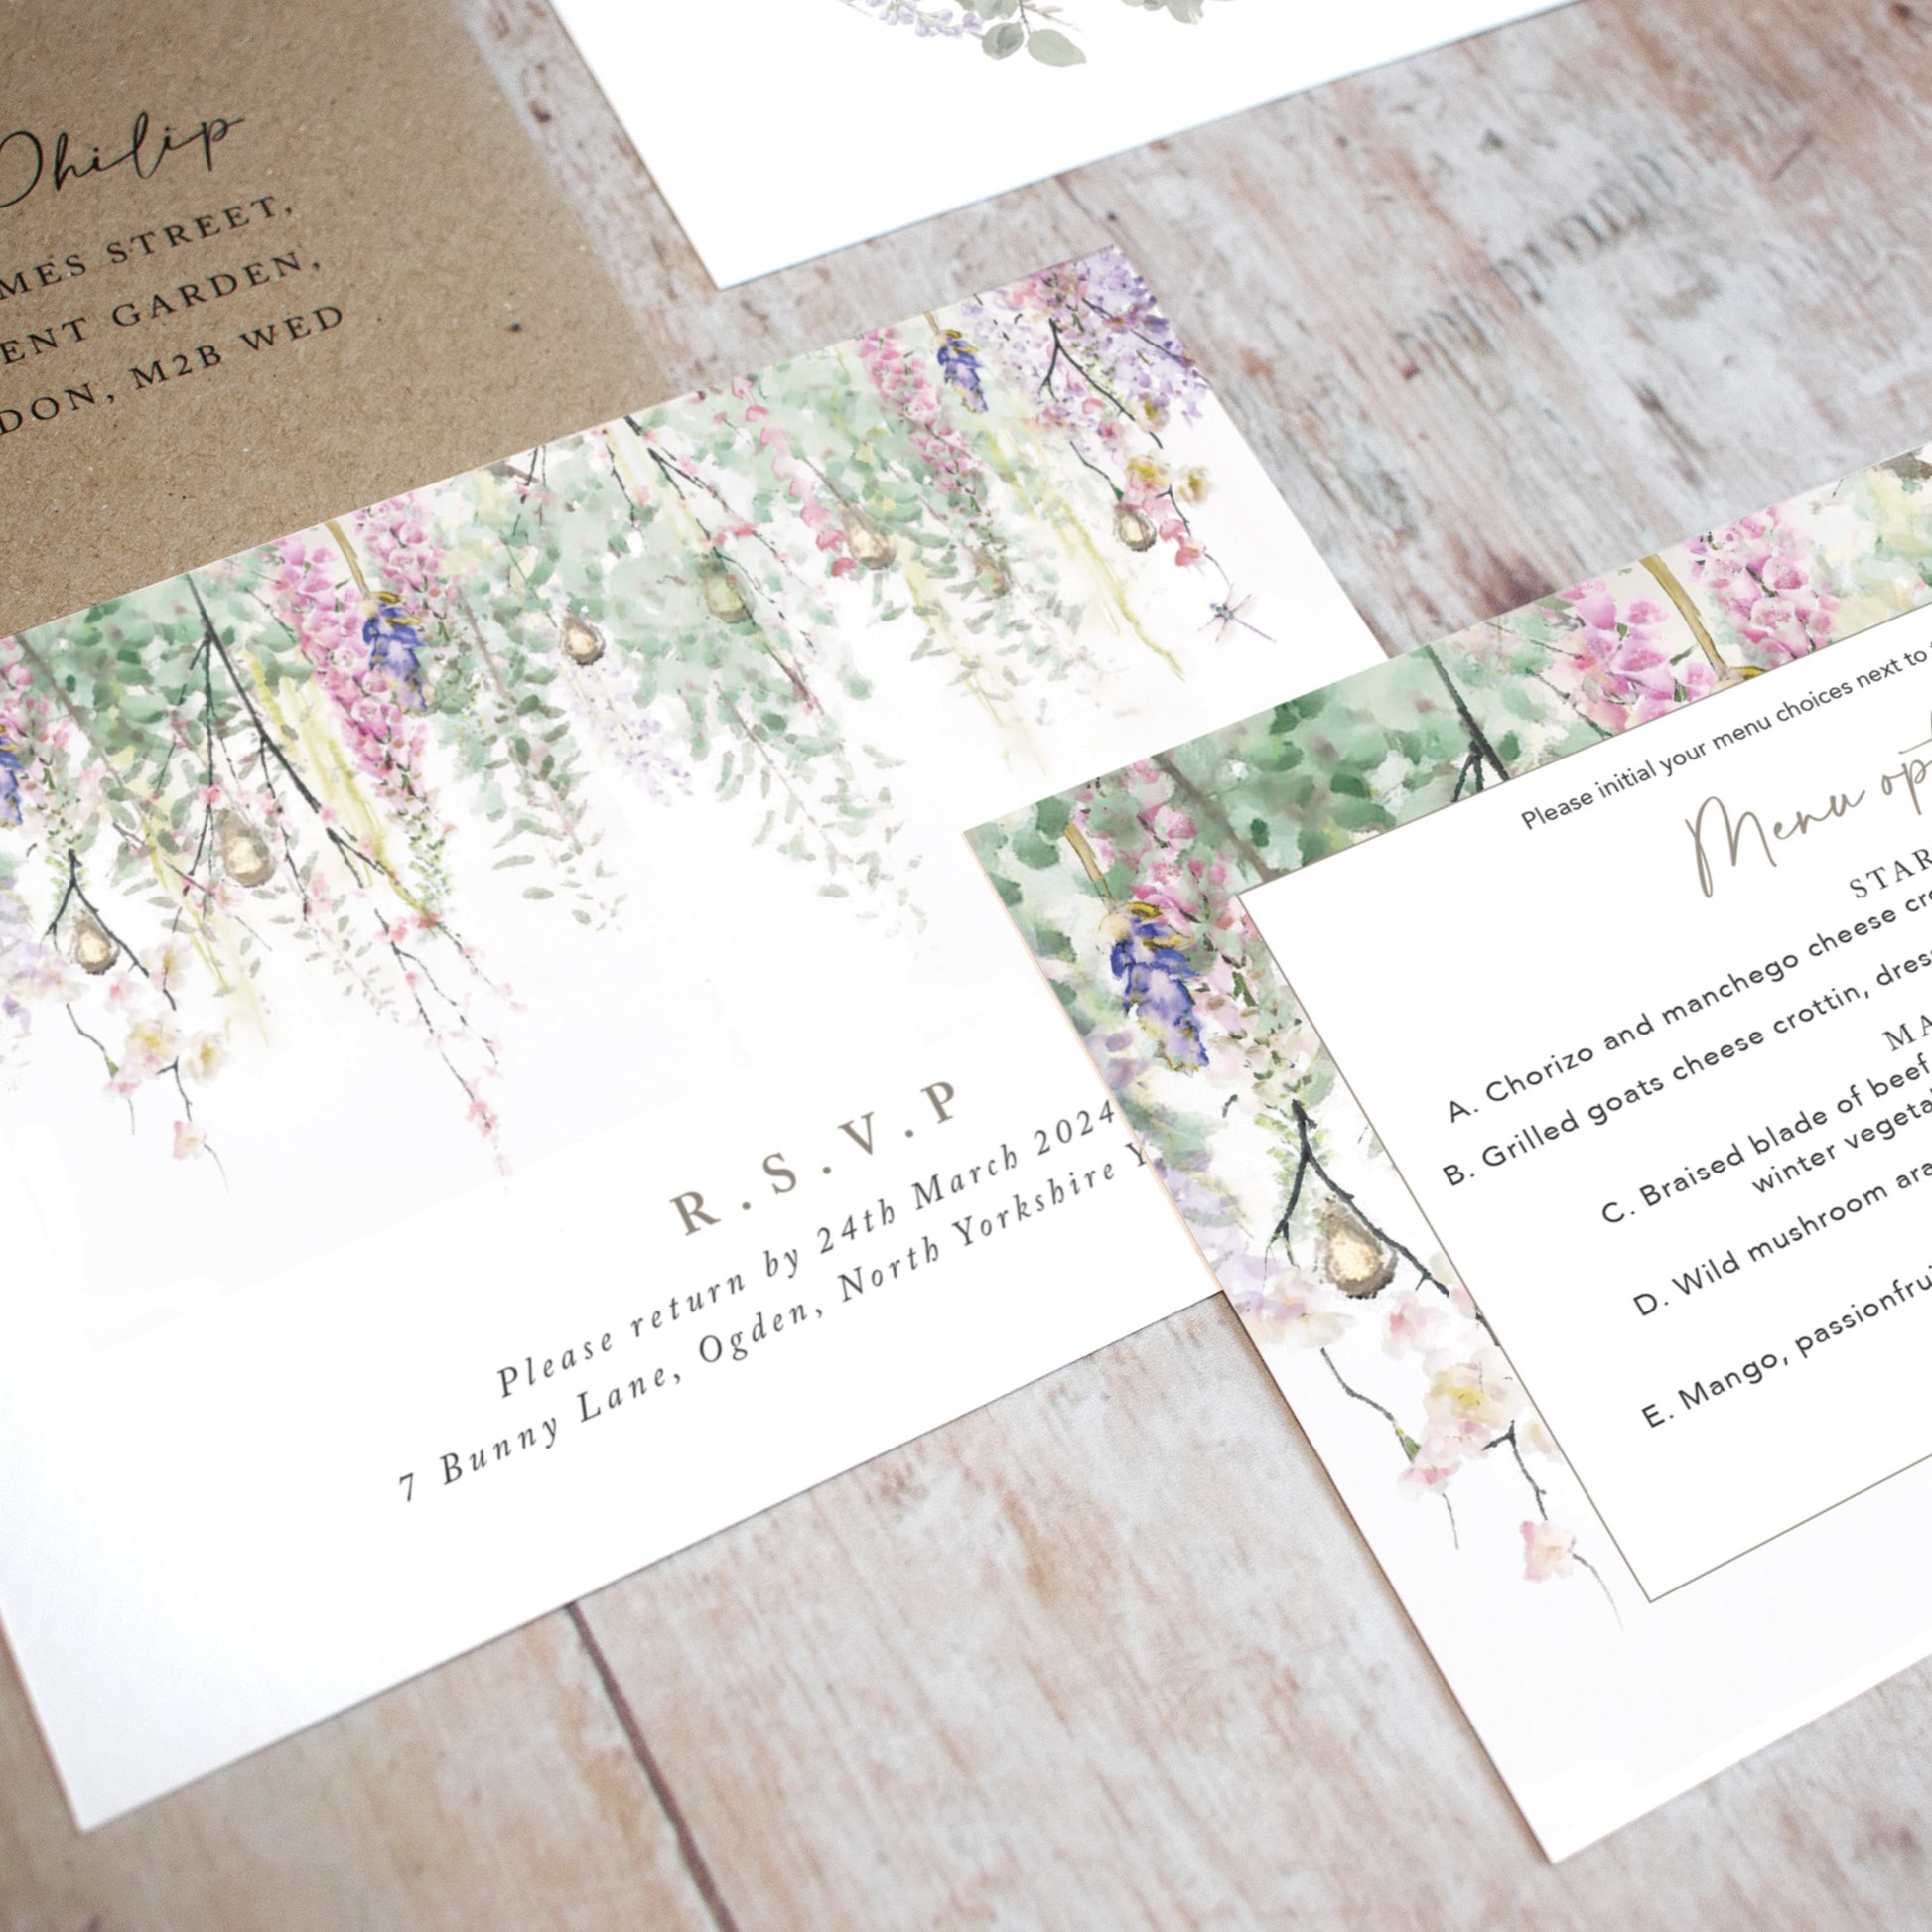 RSVP cards with menu choices for a rustic wedding